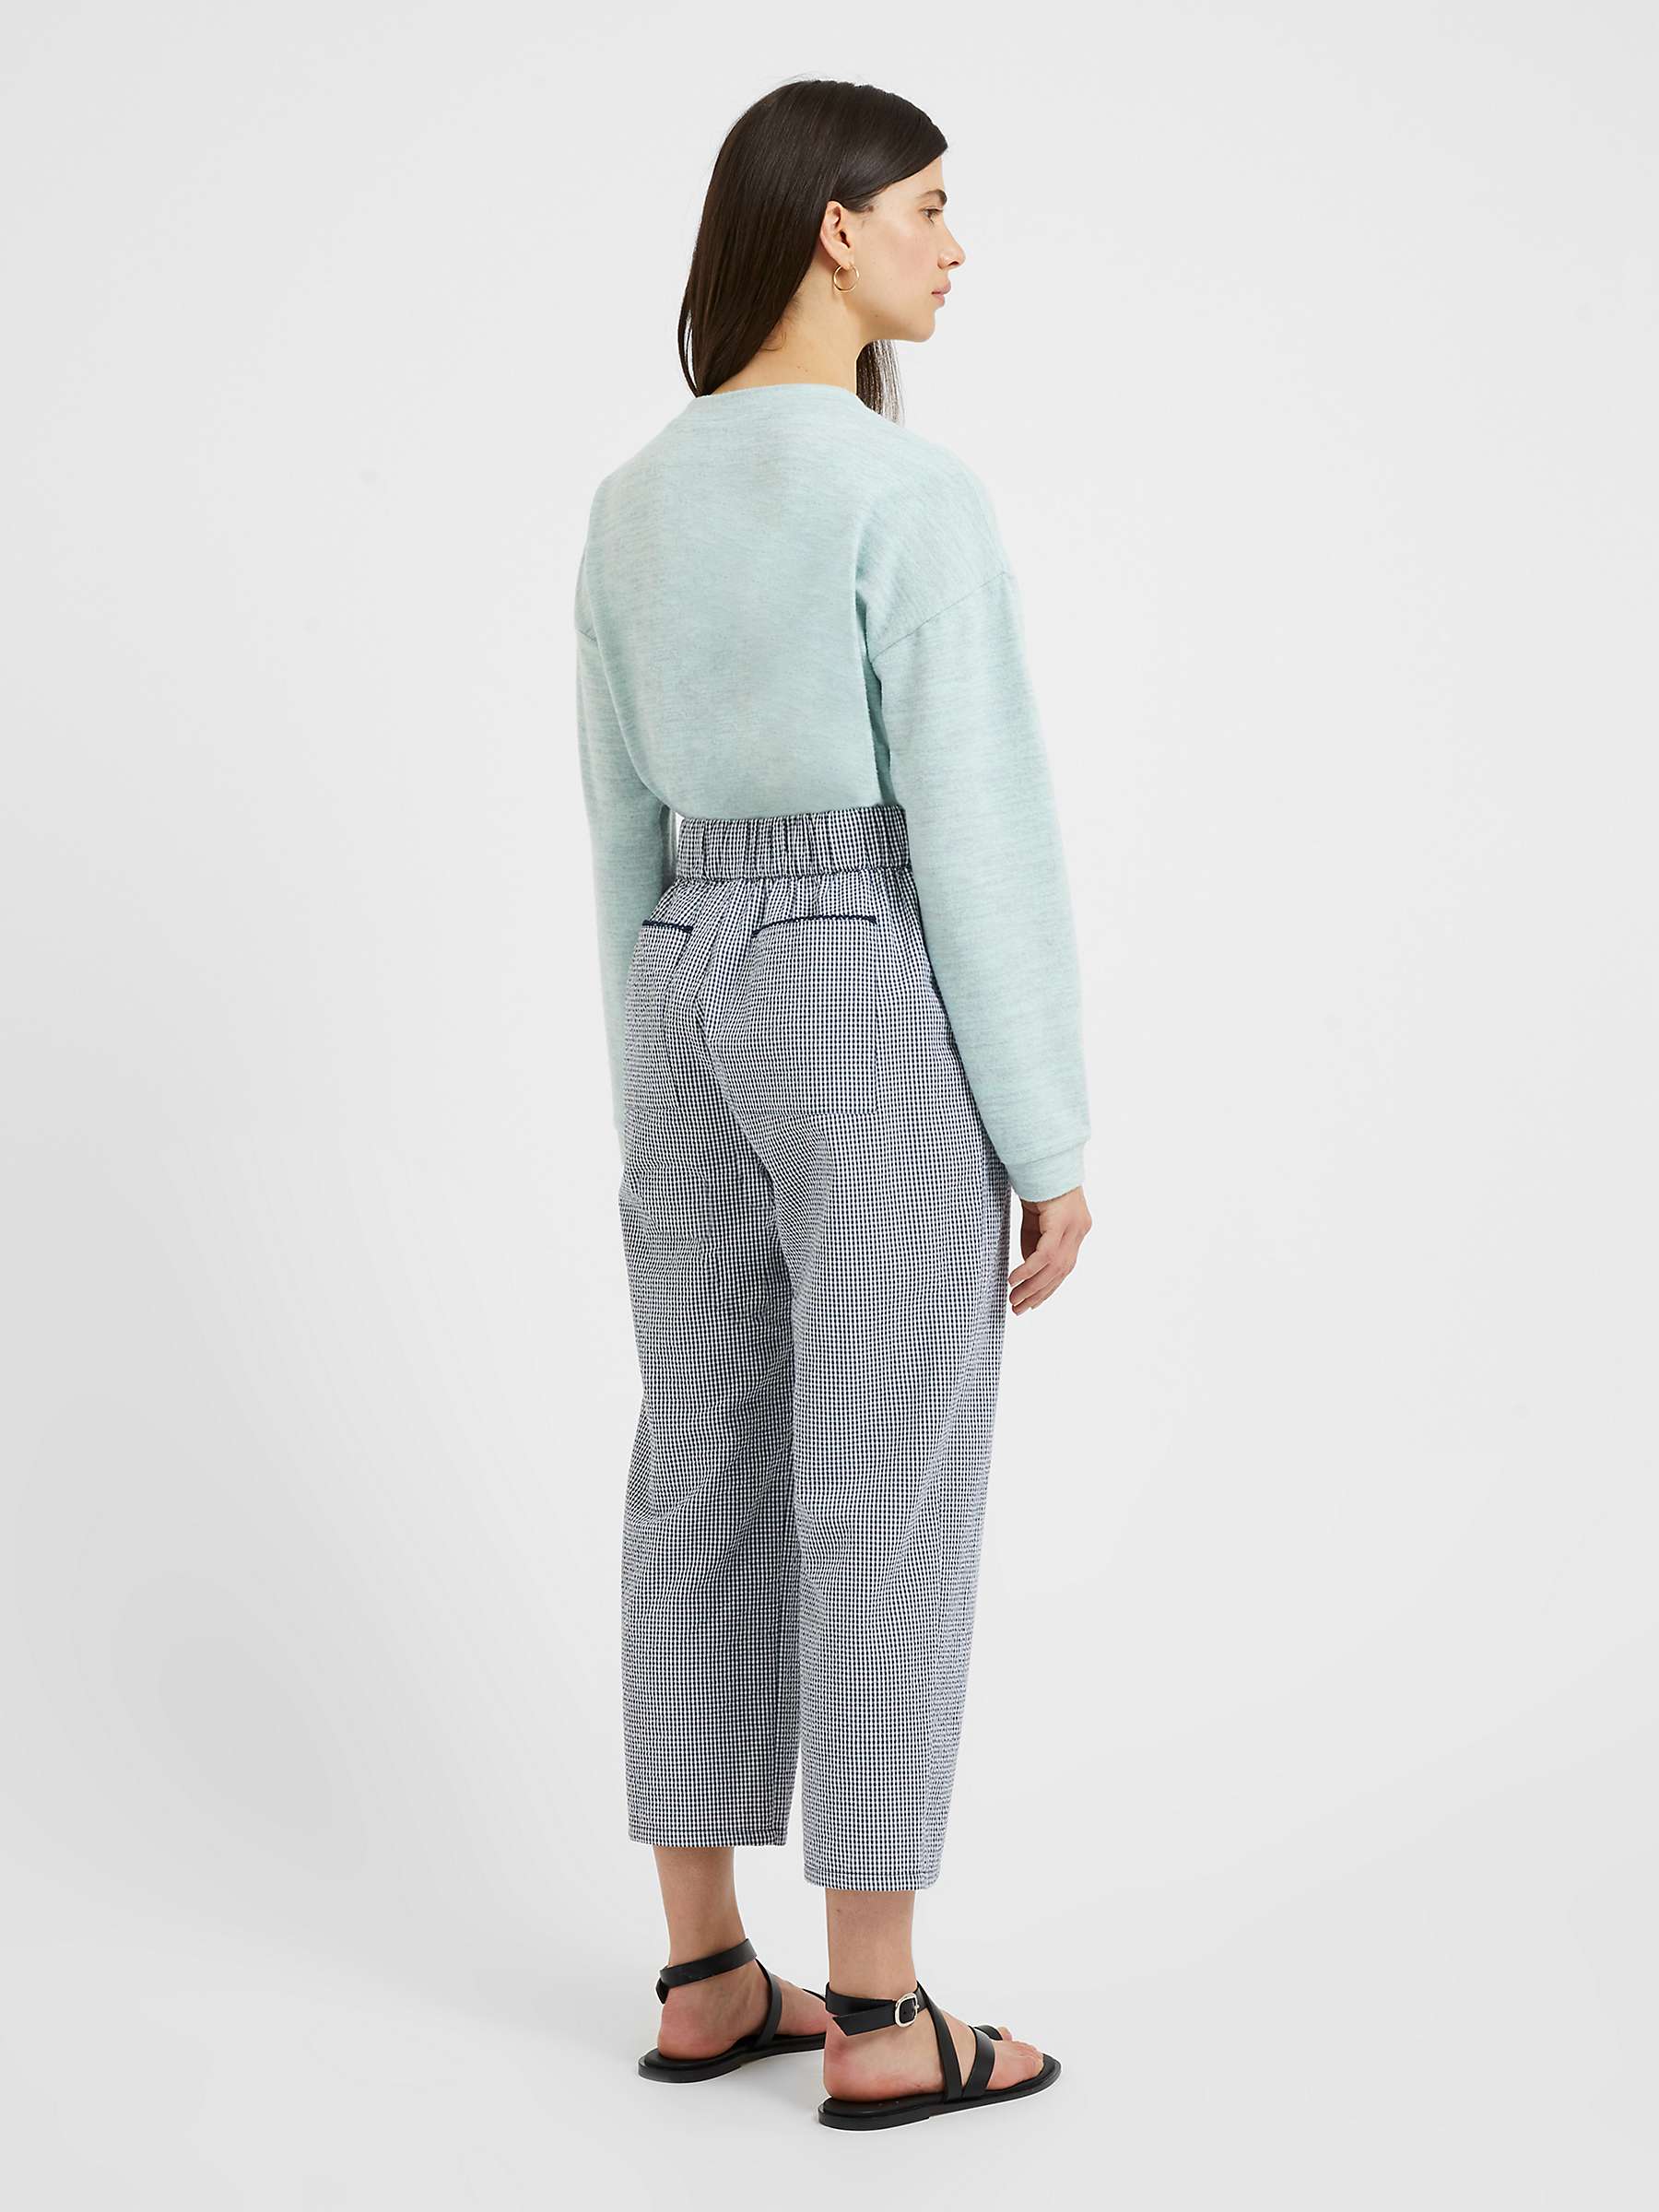 Buy Great Plains Salerno Cotton Trousers, Summer Navy/White Online at johnlewis.com